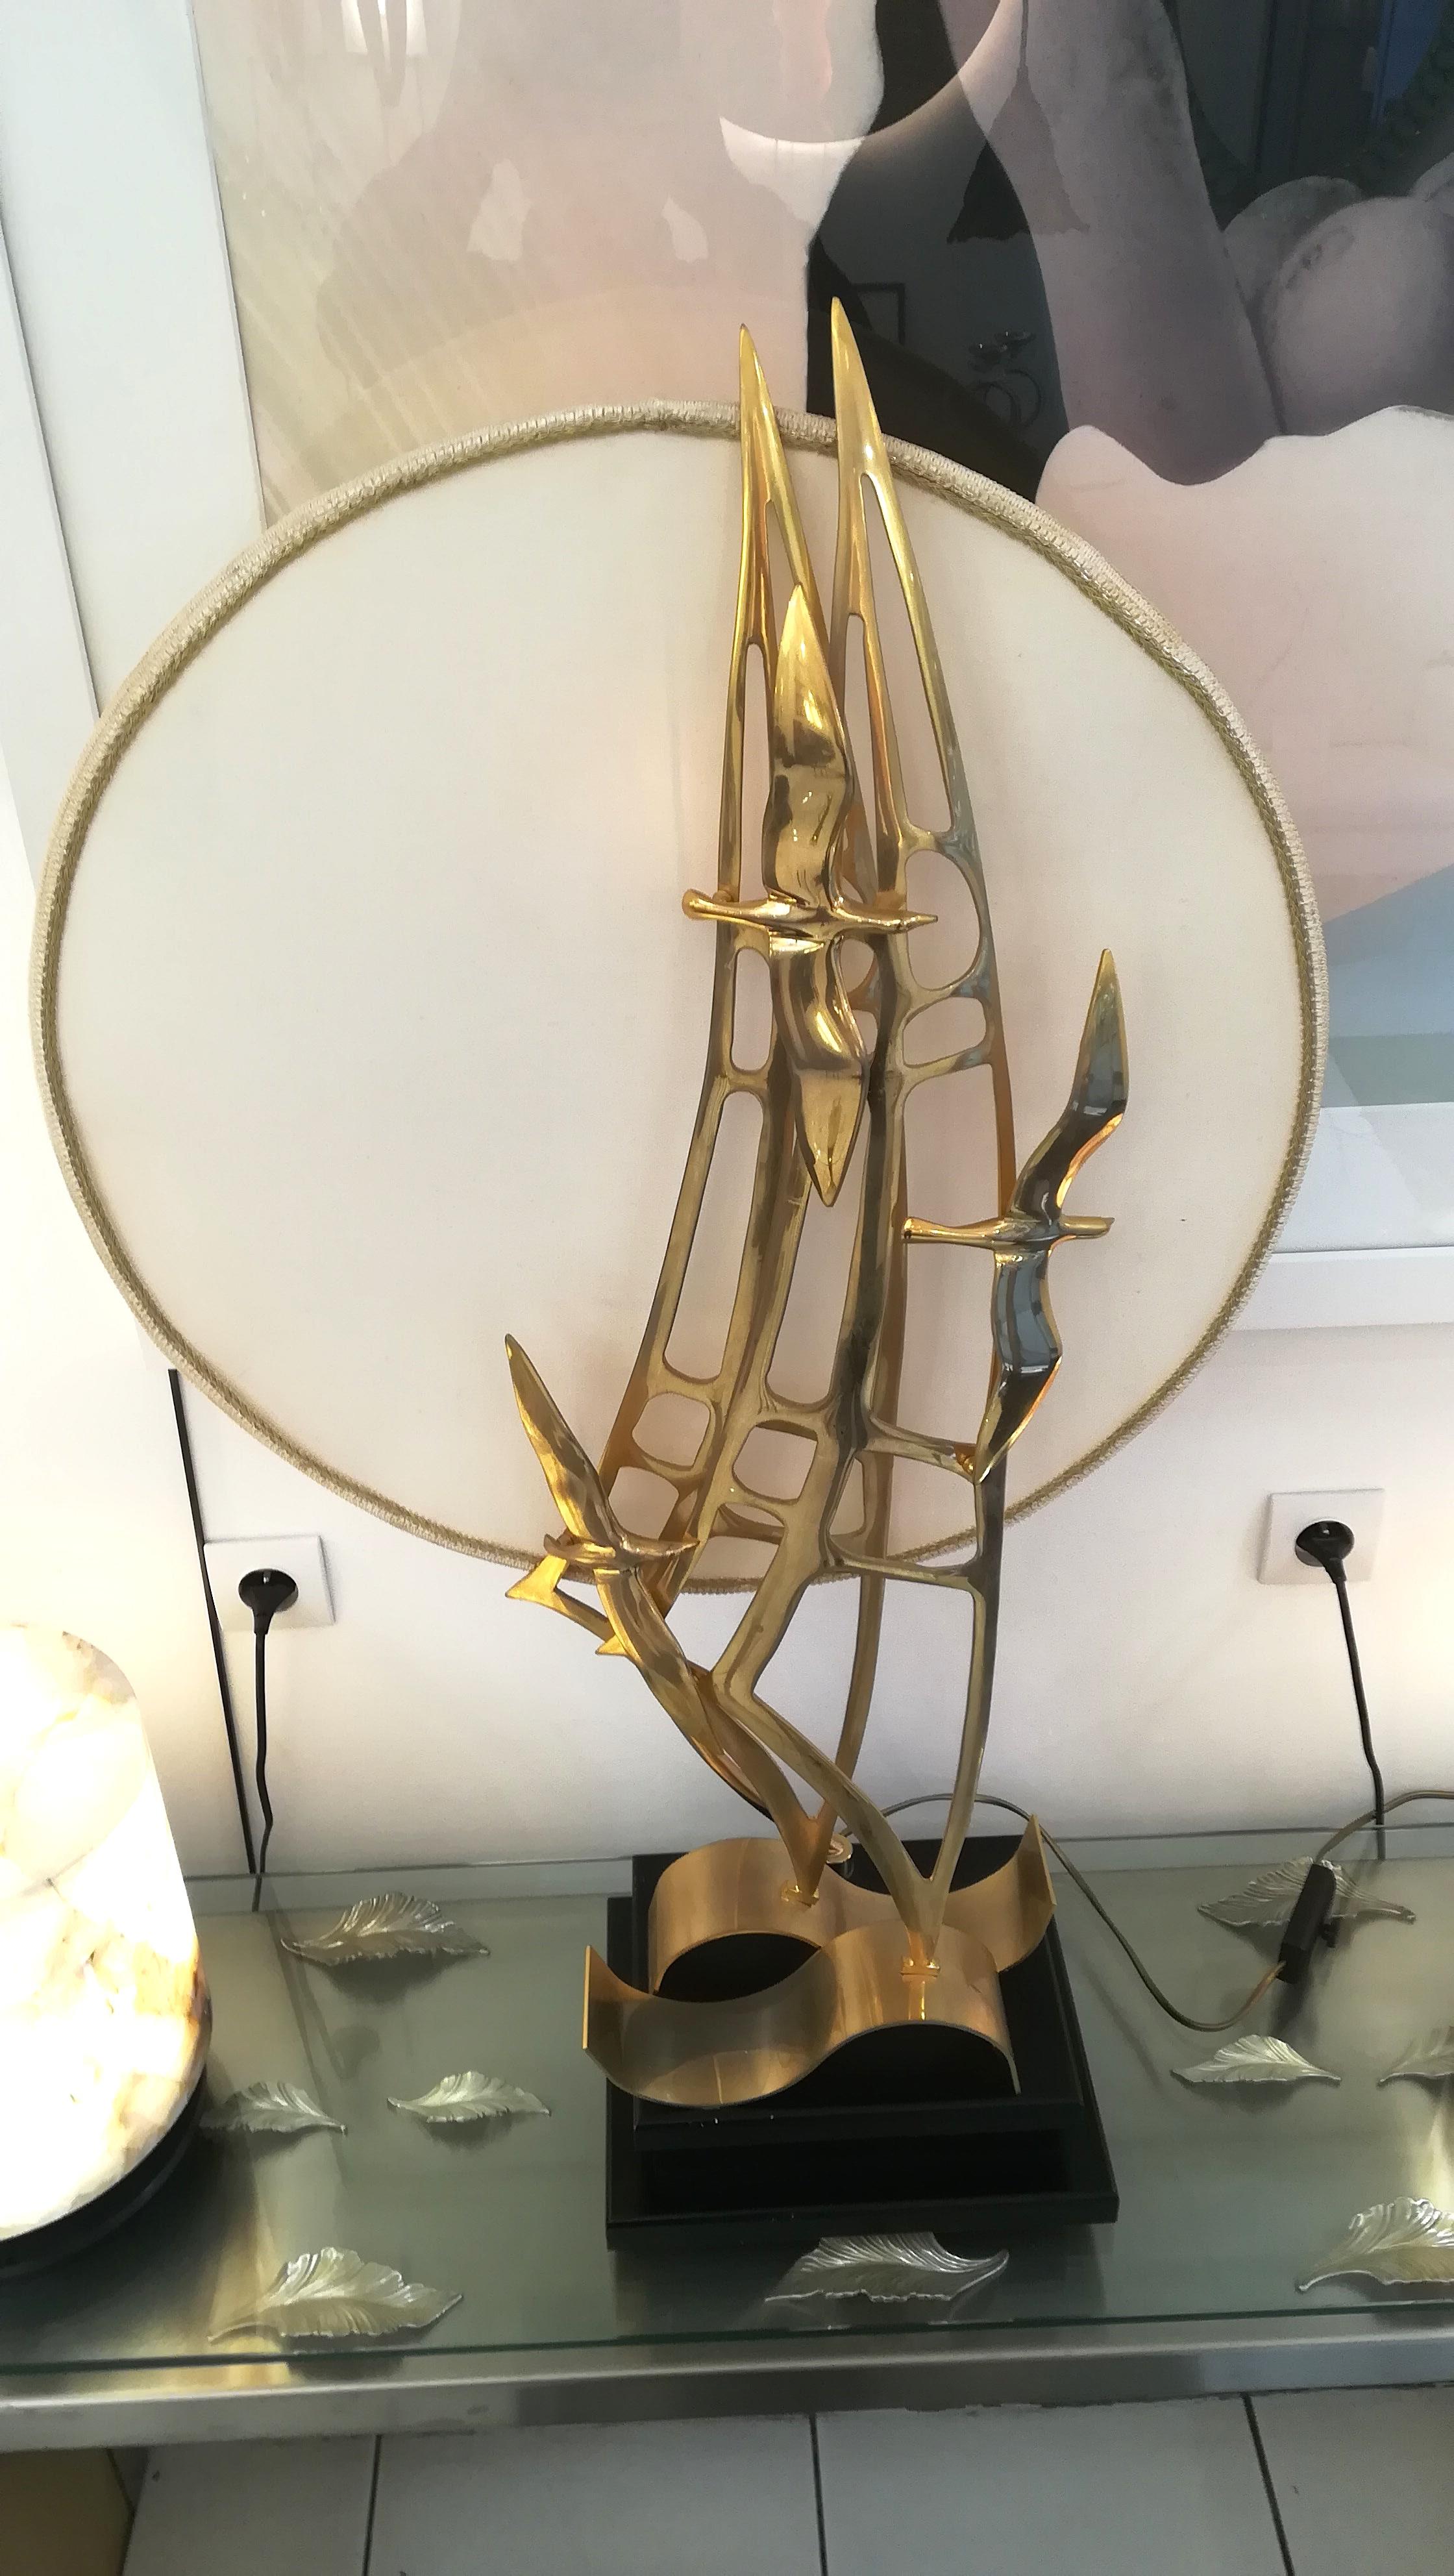 Table lamp and sculpture with sea birds by Emilio Lancia, in metal, gold patinated, depicting sea birds signed, circa 1960-1970
Wooden base
Measures: W: without lampshade 30cm.